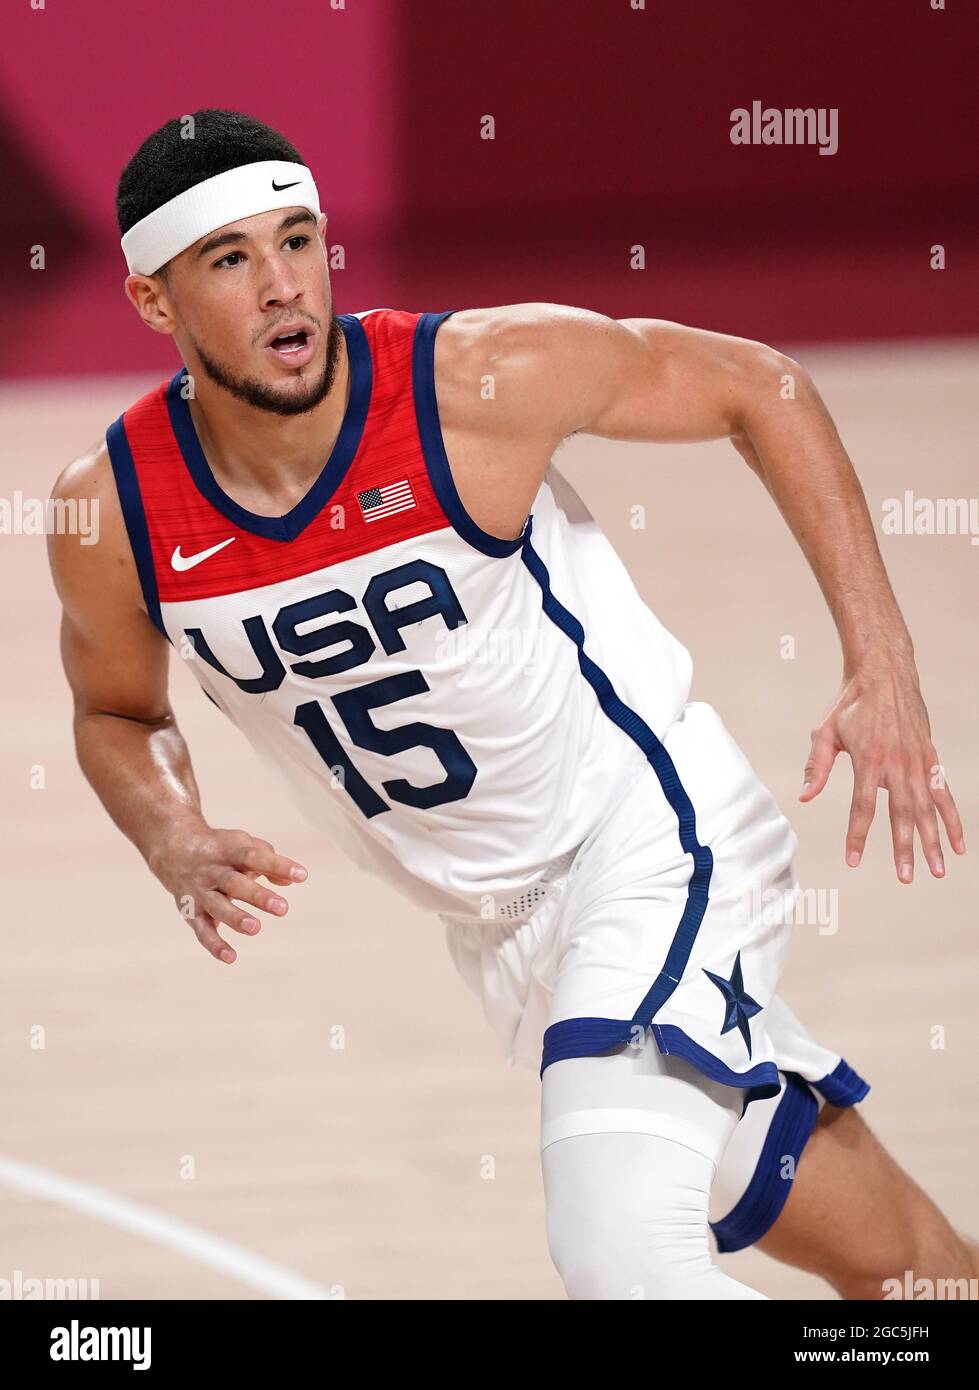 ➖ Devin Booker ➖  Devin booker wallpaper, Devin booker, Sporty outfits men